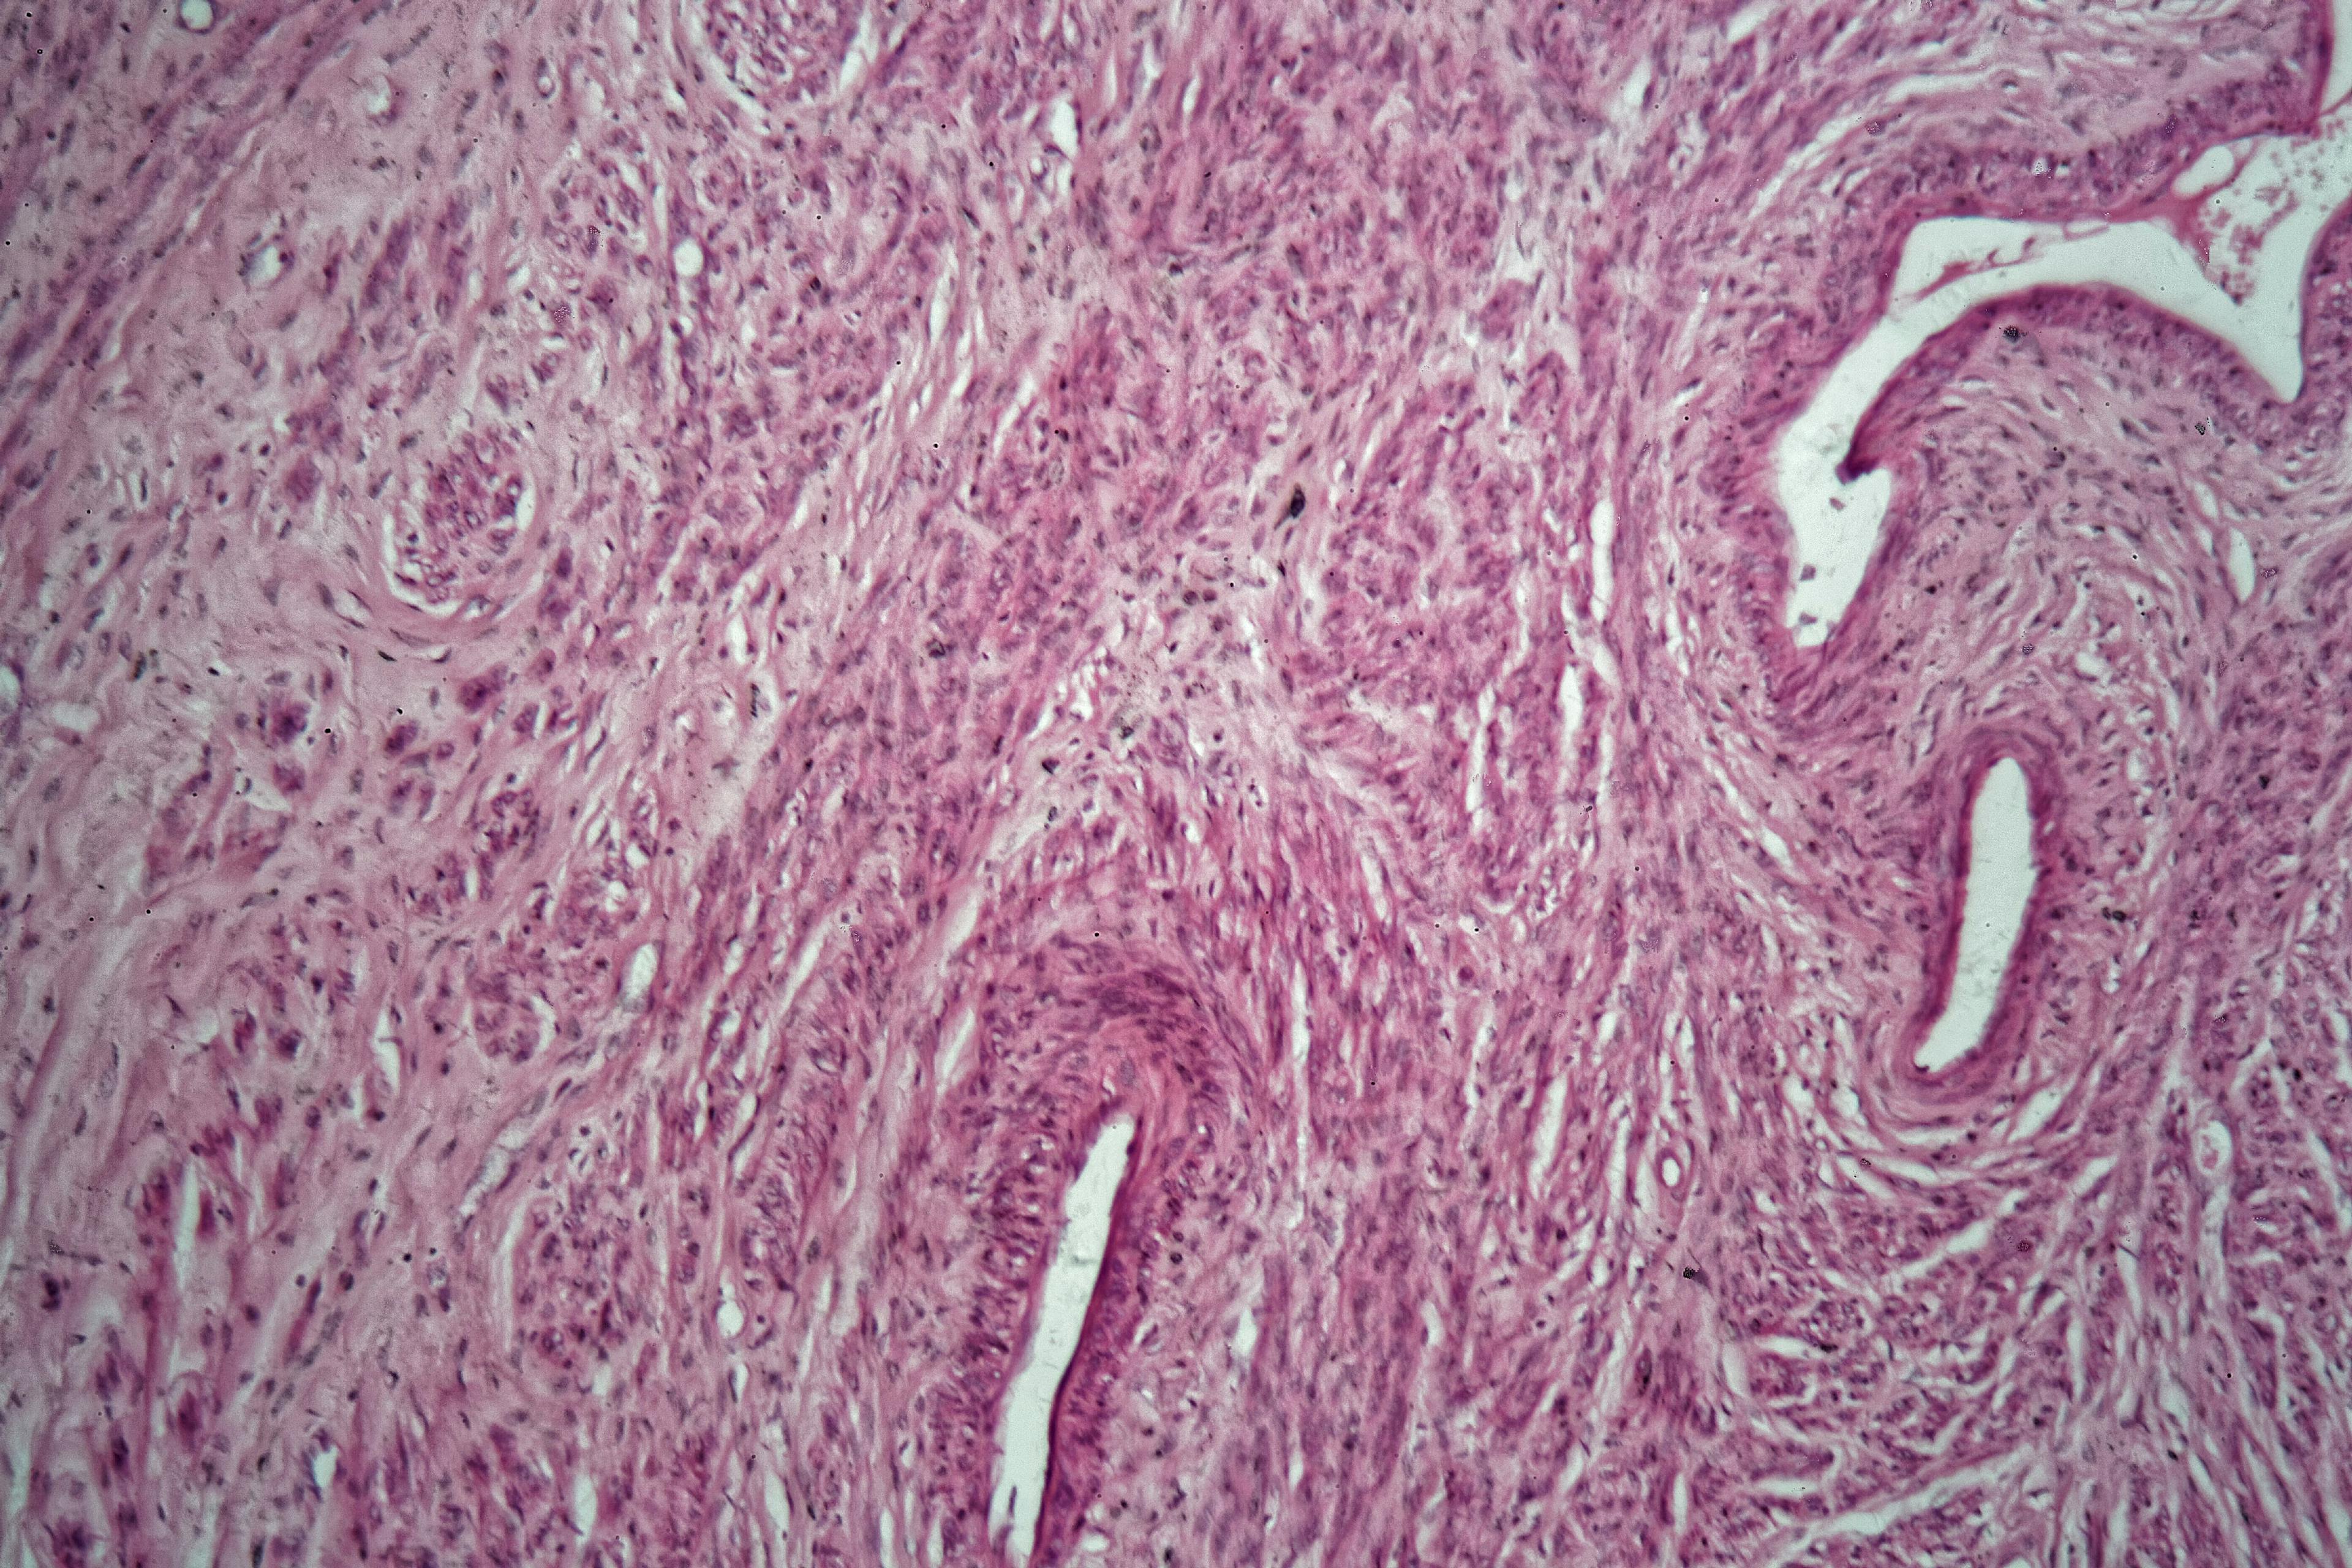 Cells of a human uterus with uterine fibroids under the microscope.